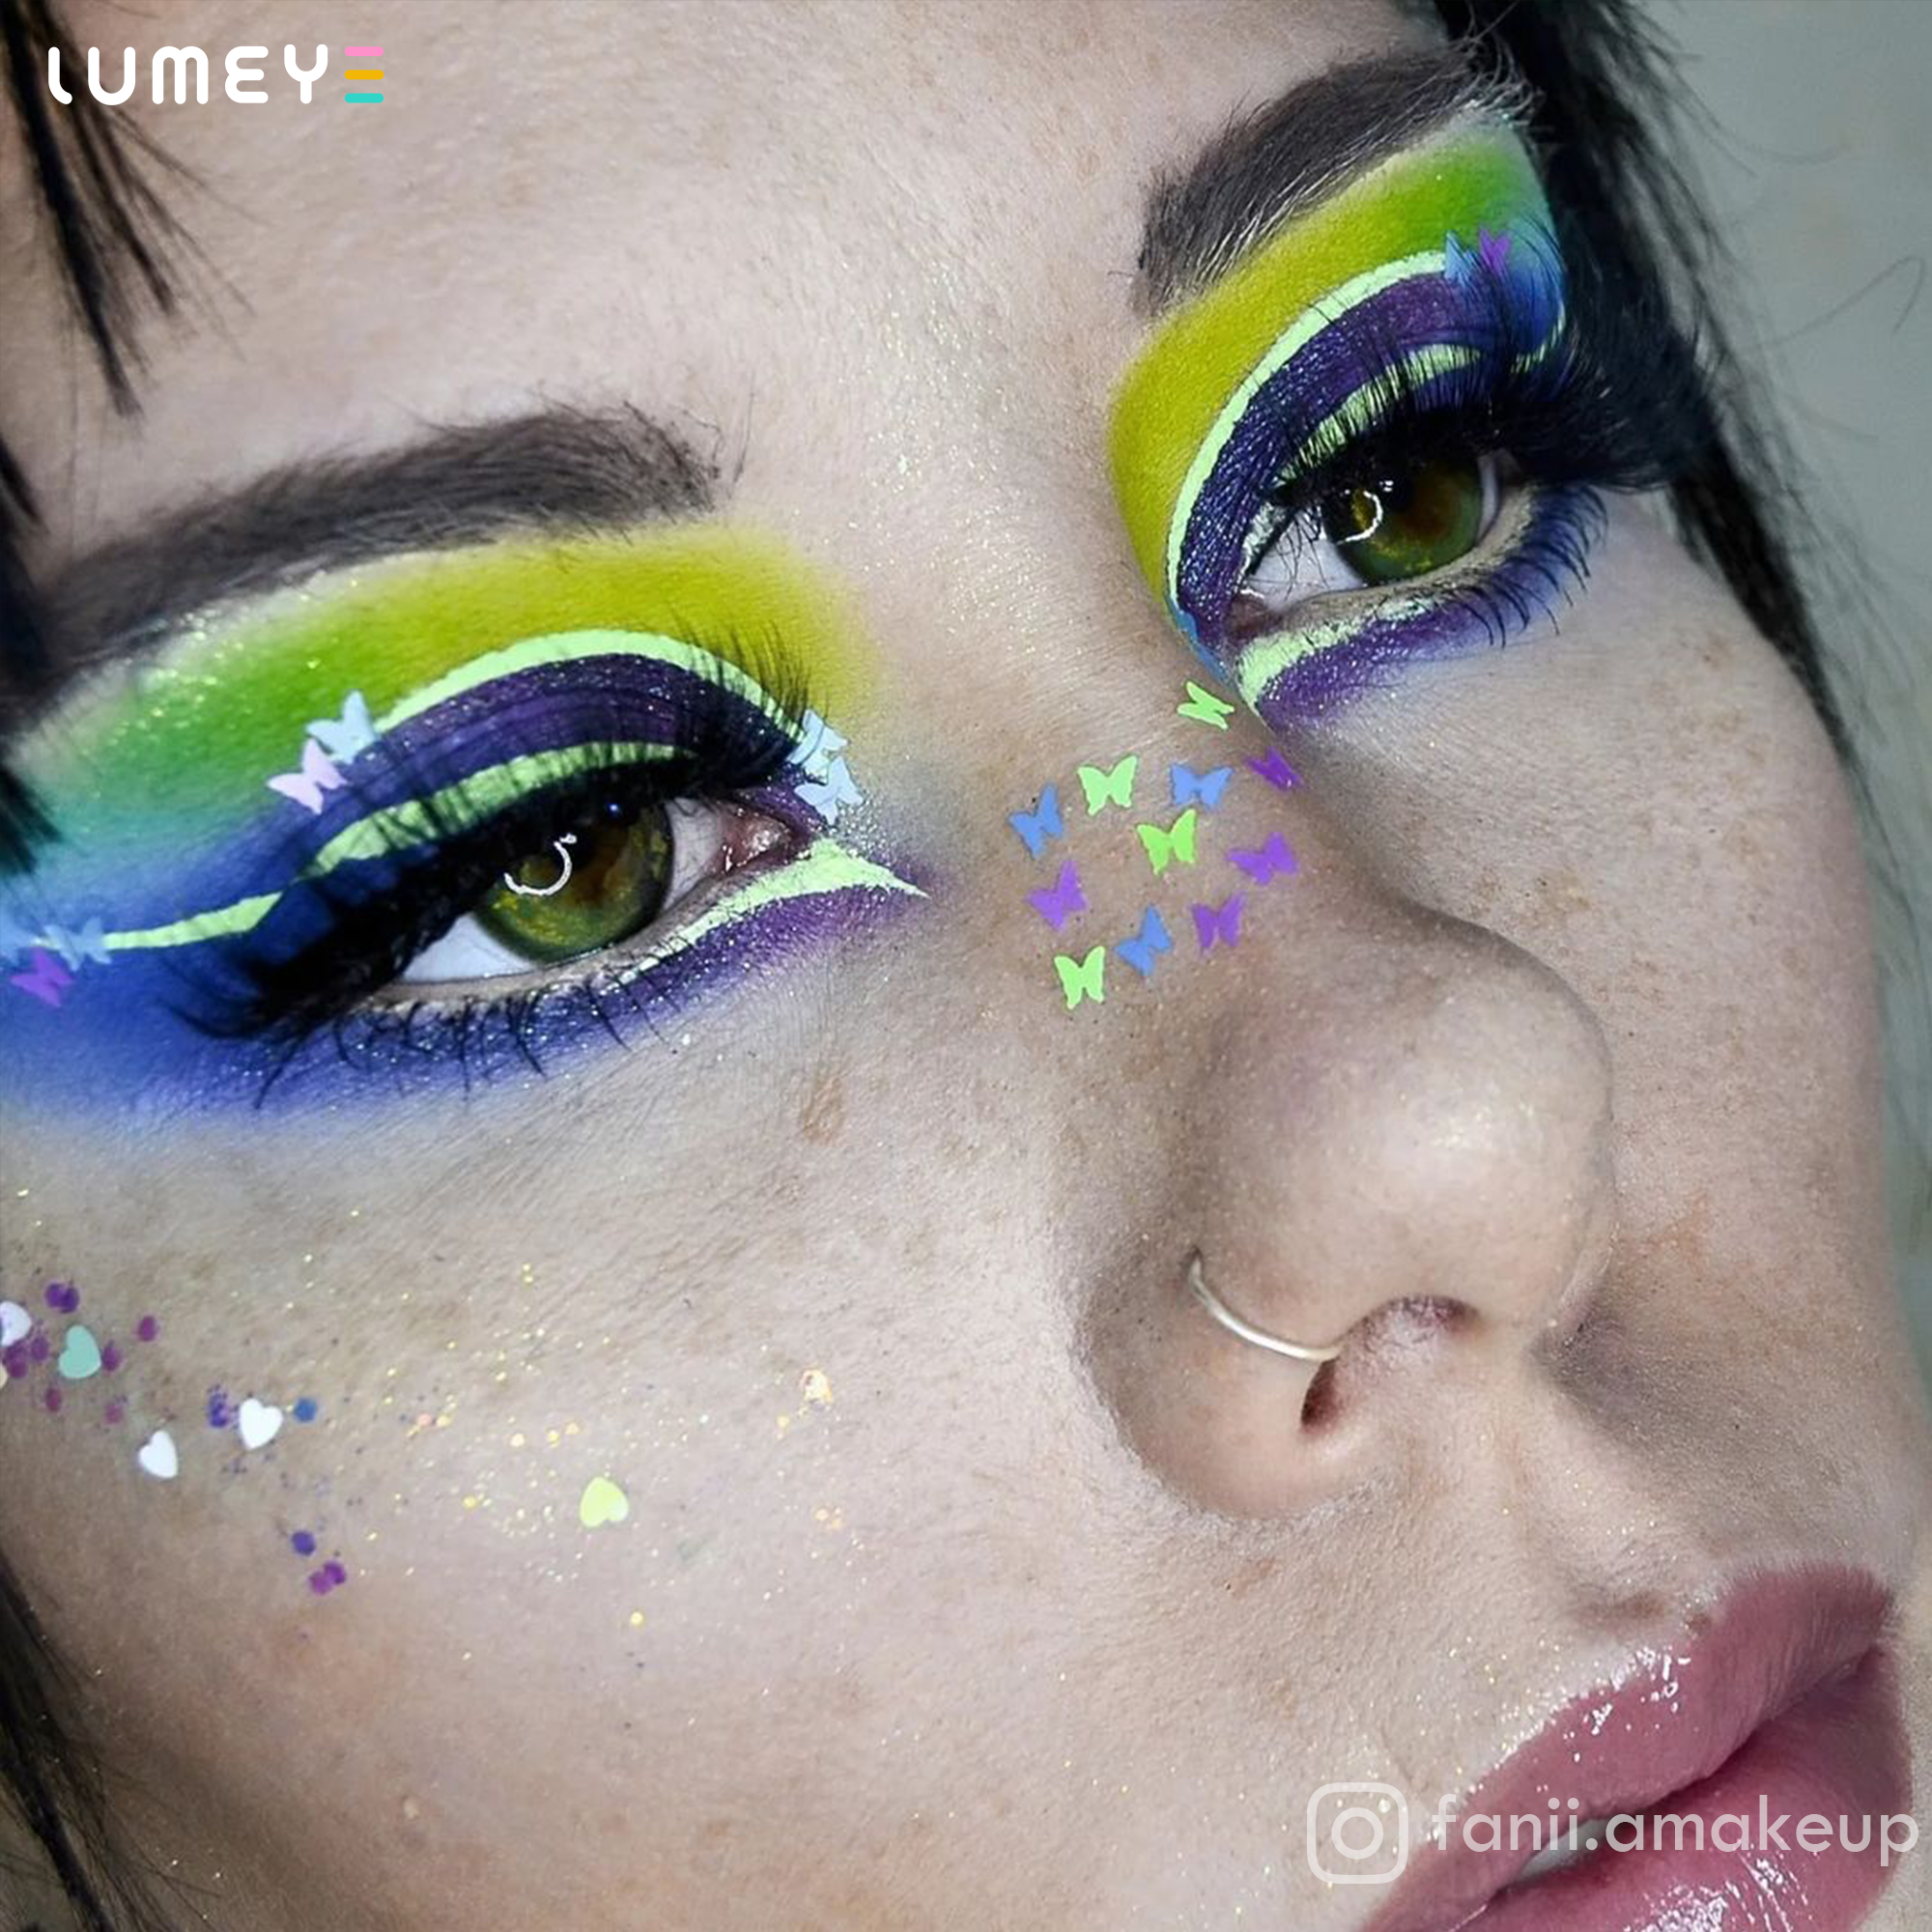 Best COLORED CONTACTS - LUMEYE Fairy Swamp Green Colored Contact Lenses - LUMEYE